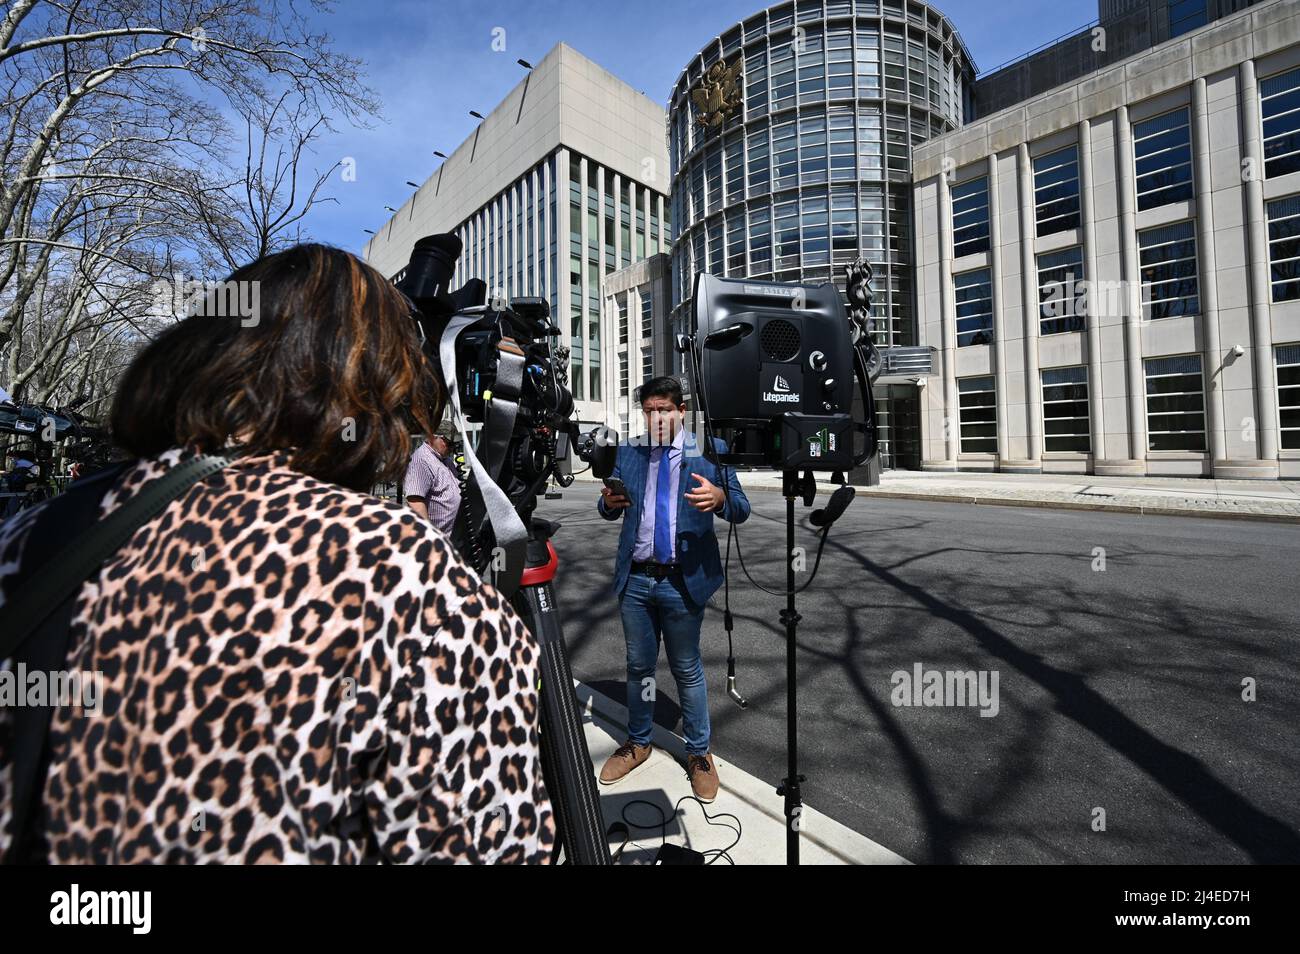 New York, USA. 14th Apr, 2022. Members of the media cover the court appearance of Frank James outside the federal courthouse in Brooklyn, New York on Apr. 14, 2022. Frank James appeared in court on charges he discharged a firearm and used smoke canisters on a subway train at the 36th Street N train station on Apr. 12, 2022. (Photo by Anthony Behar/Sipa USA) Credit: Sipa USA/Alamy Live News Stock Photo